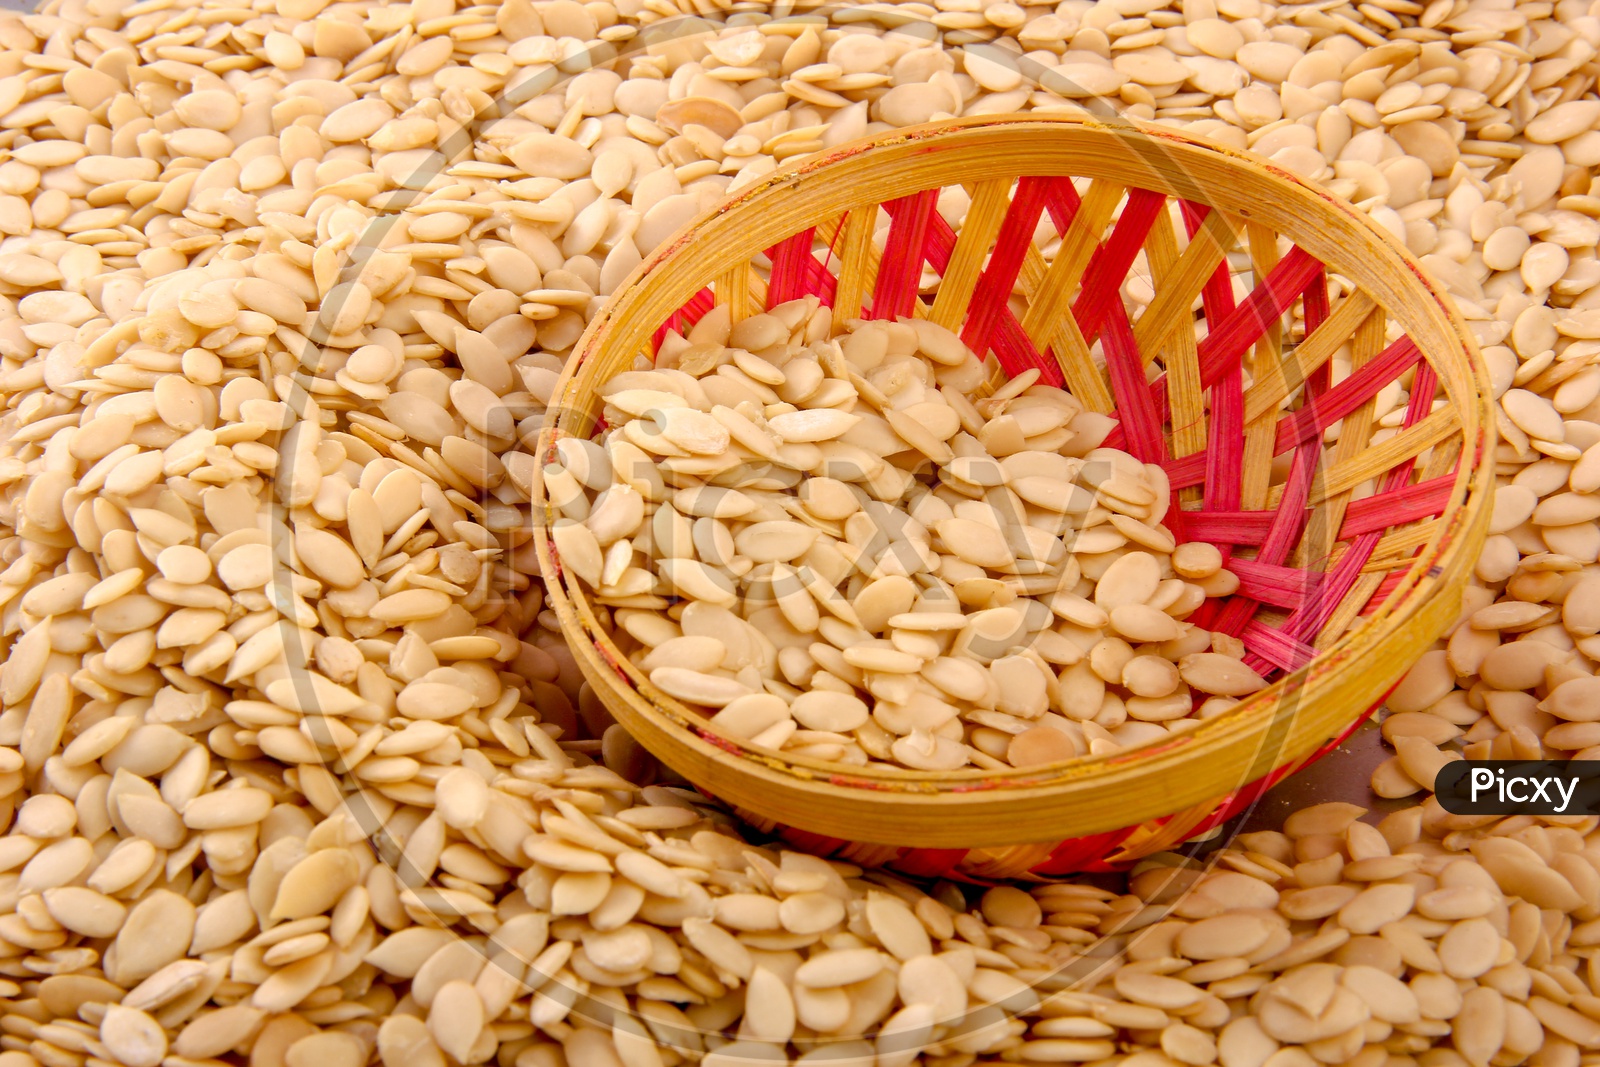 Dried Muskmelon Seeds In A Bowl